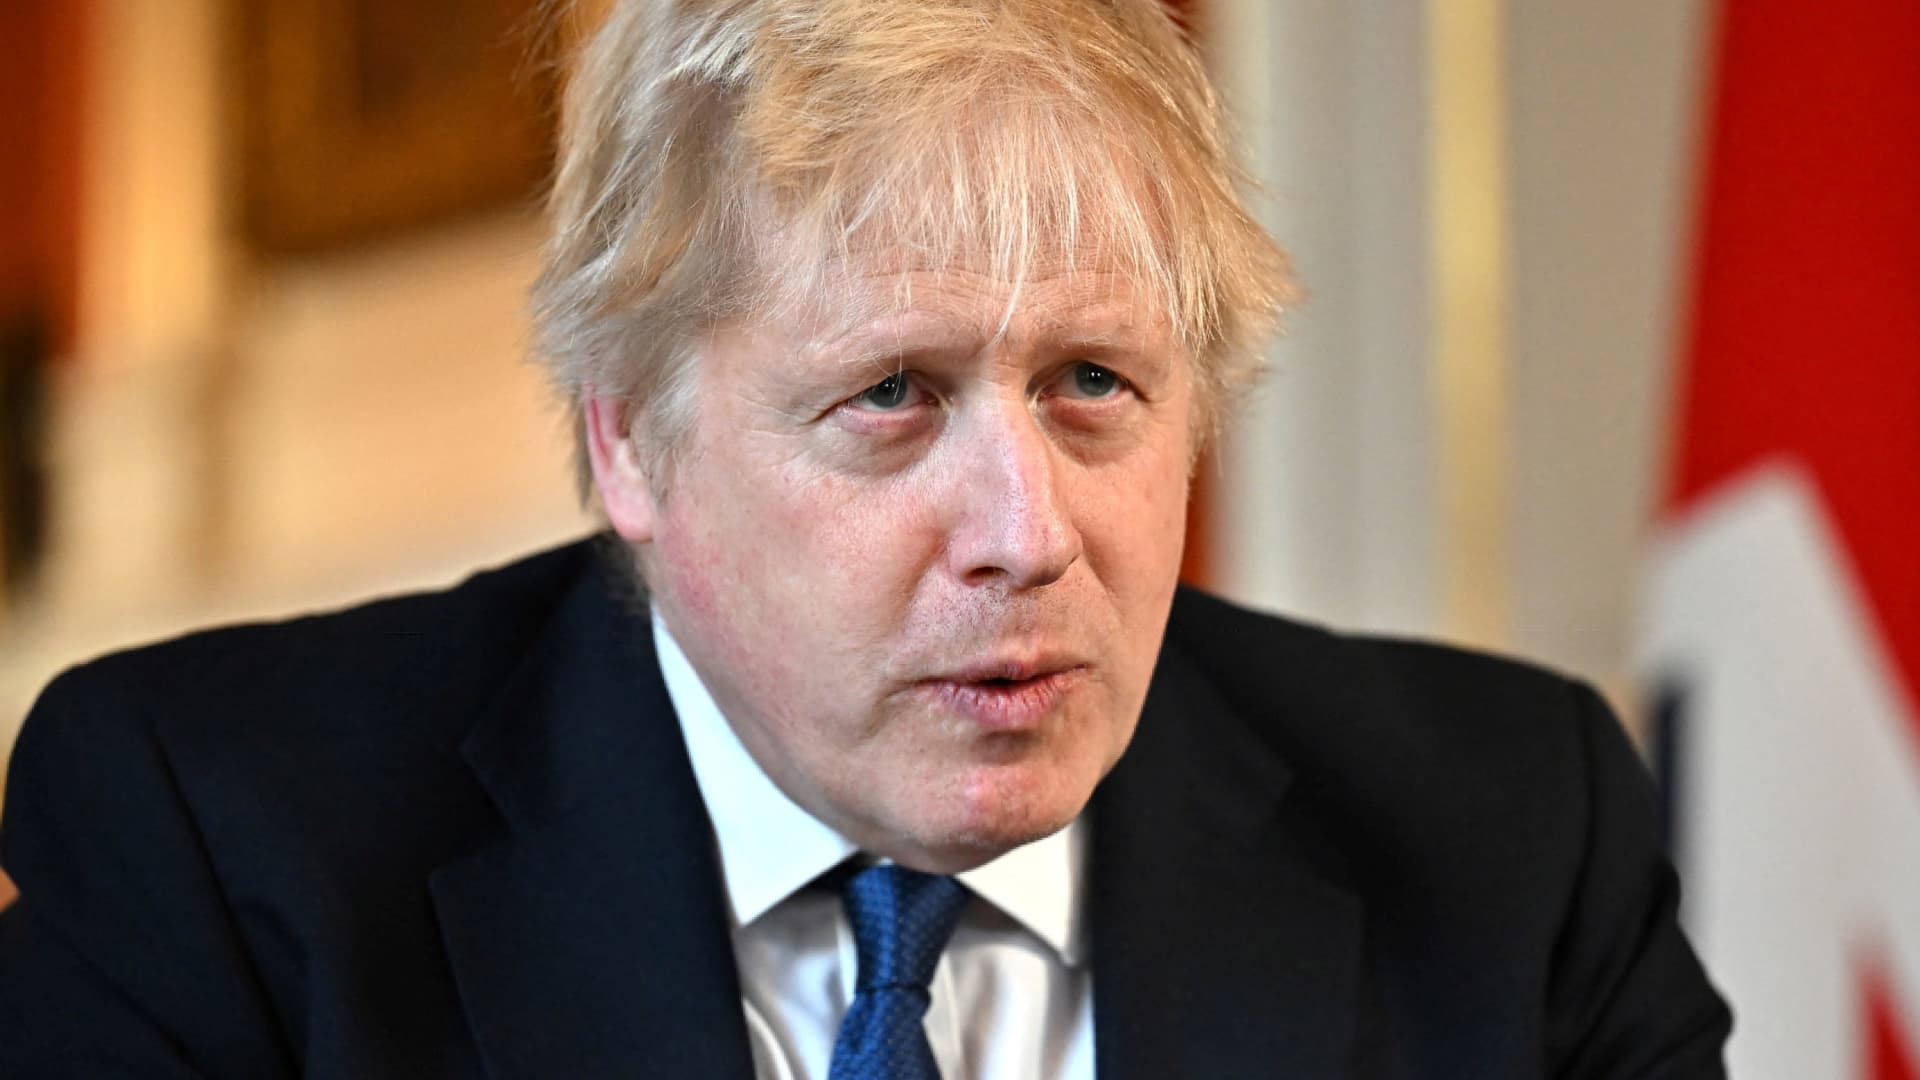 British Prime Minister Boris Johnson records an address at Downing Street after he chaired an emergency Cobra meeting to discuss the UK response to the Russian invasion of Ukraine, in London, Britain February 24, 2022.